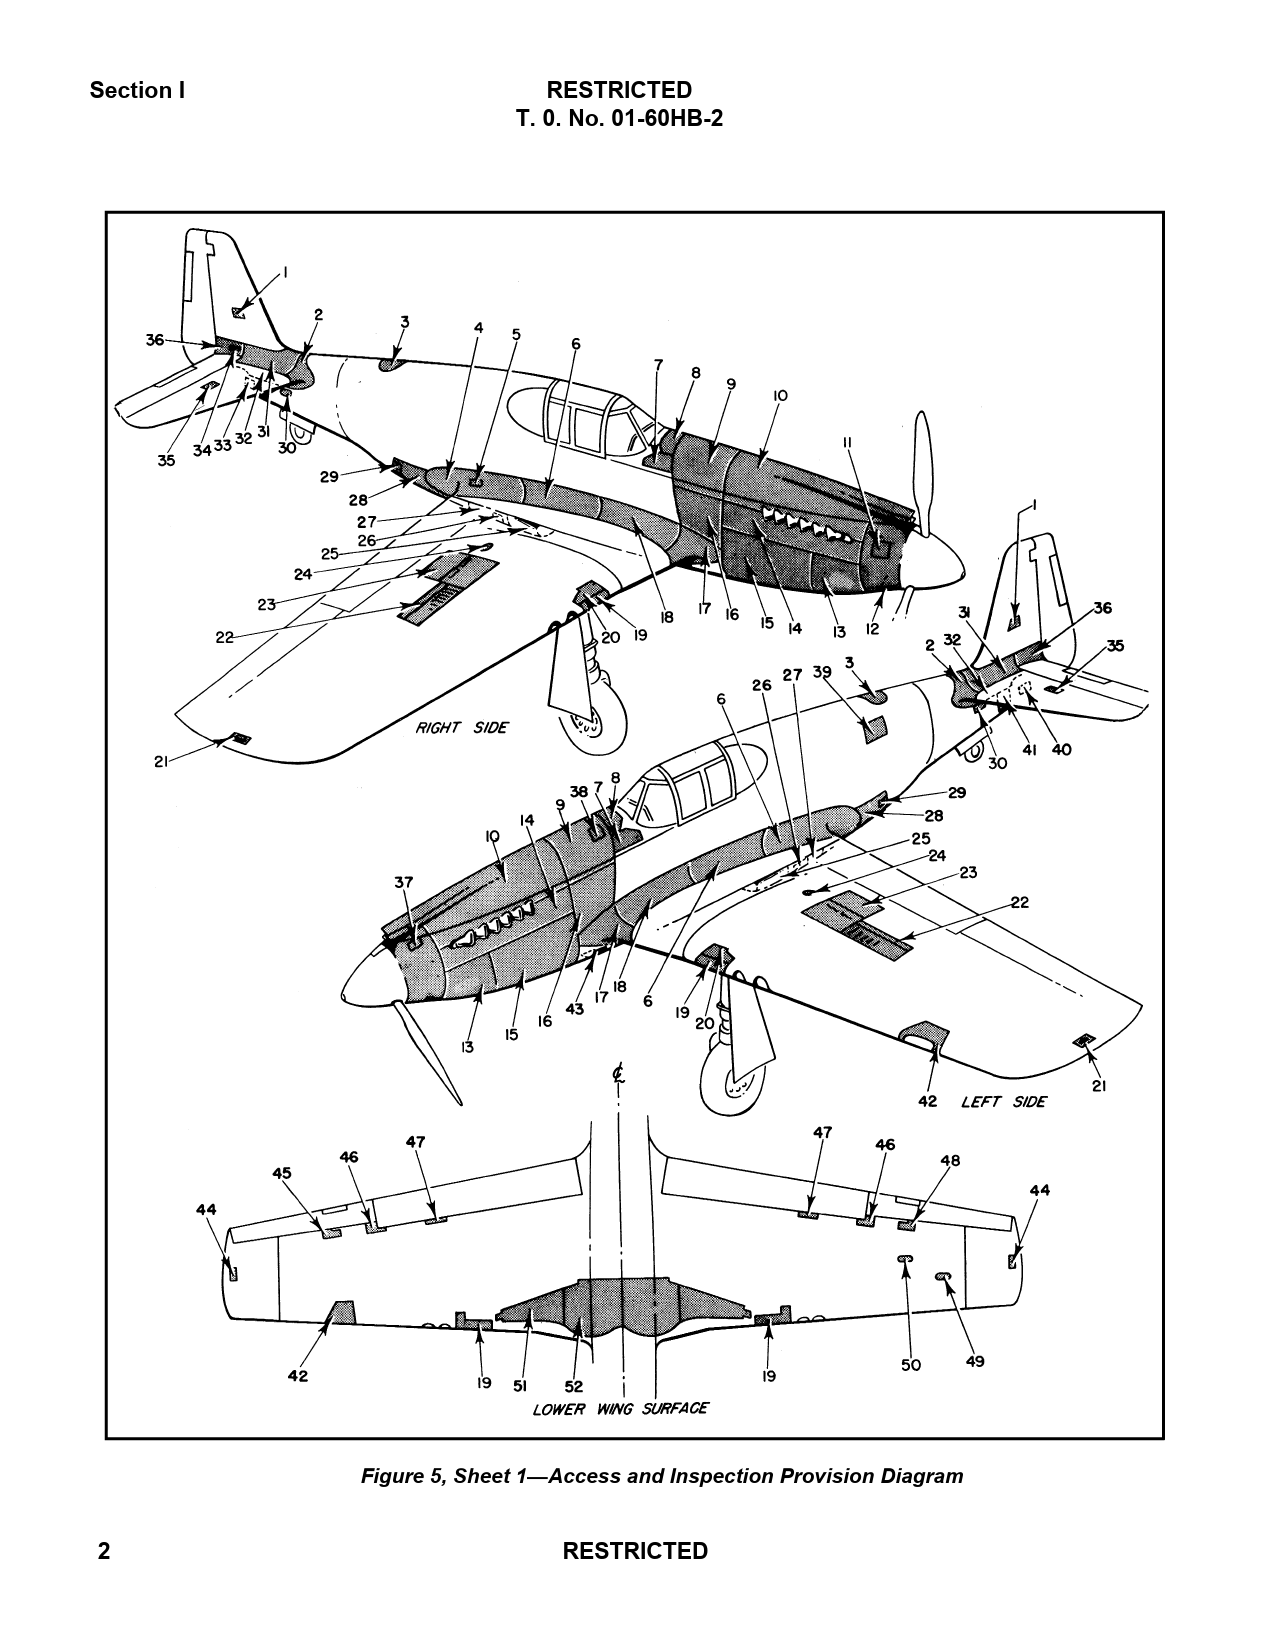 Sample page 8 from AirCorps Library document: Erection and Maintenance Instructions for A-36A